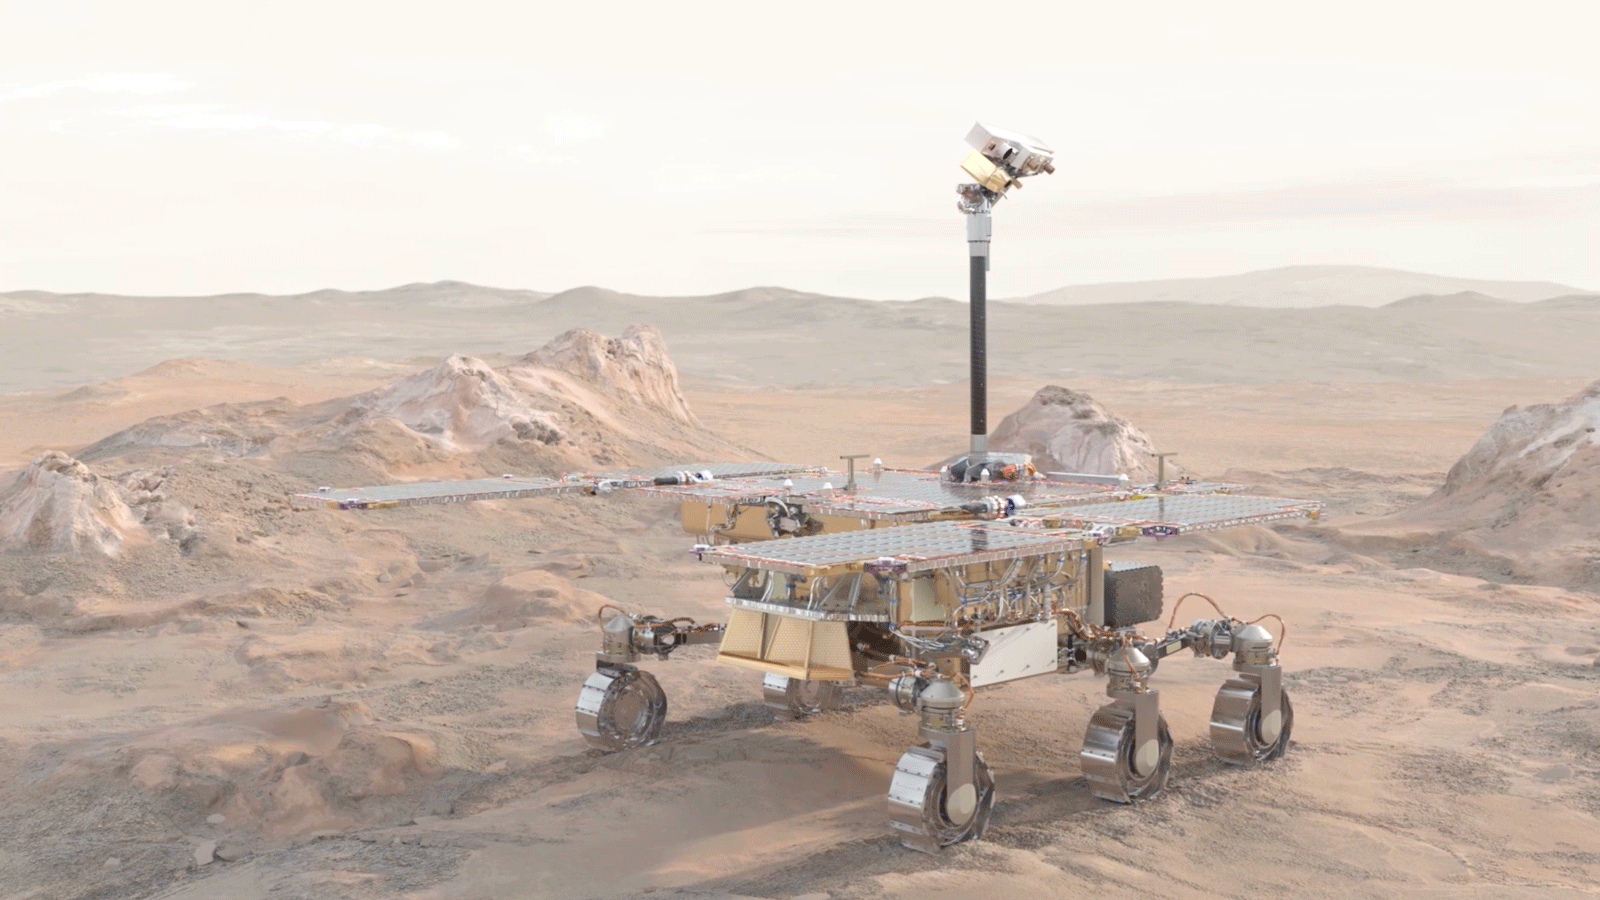 ESA and Nasa team up to land rover on Mars